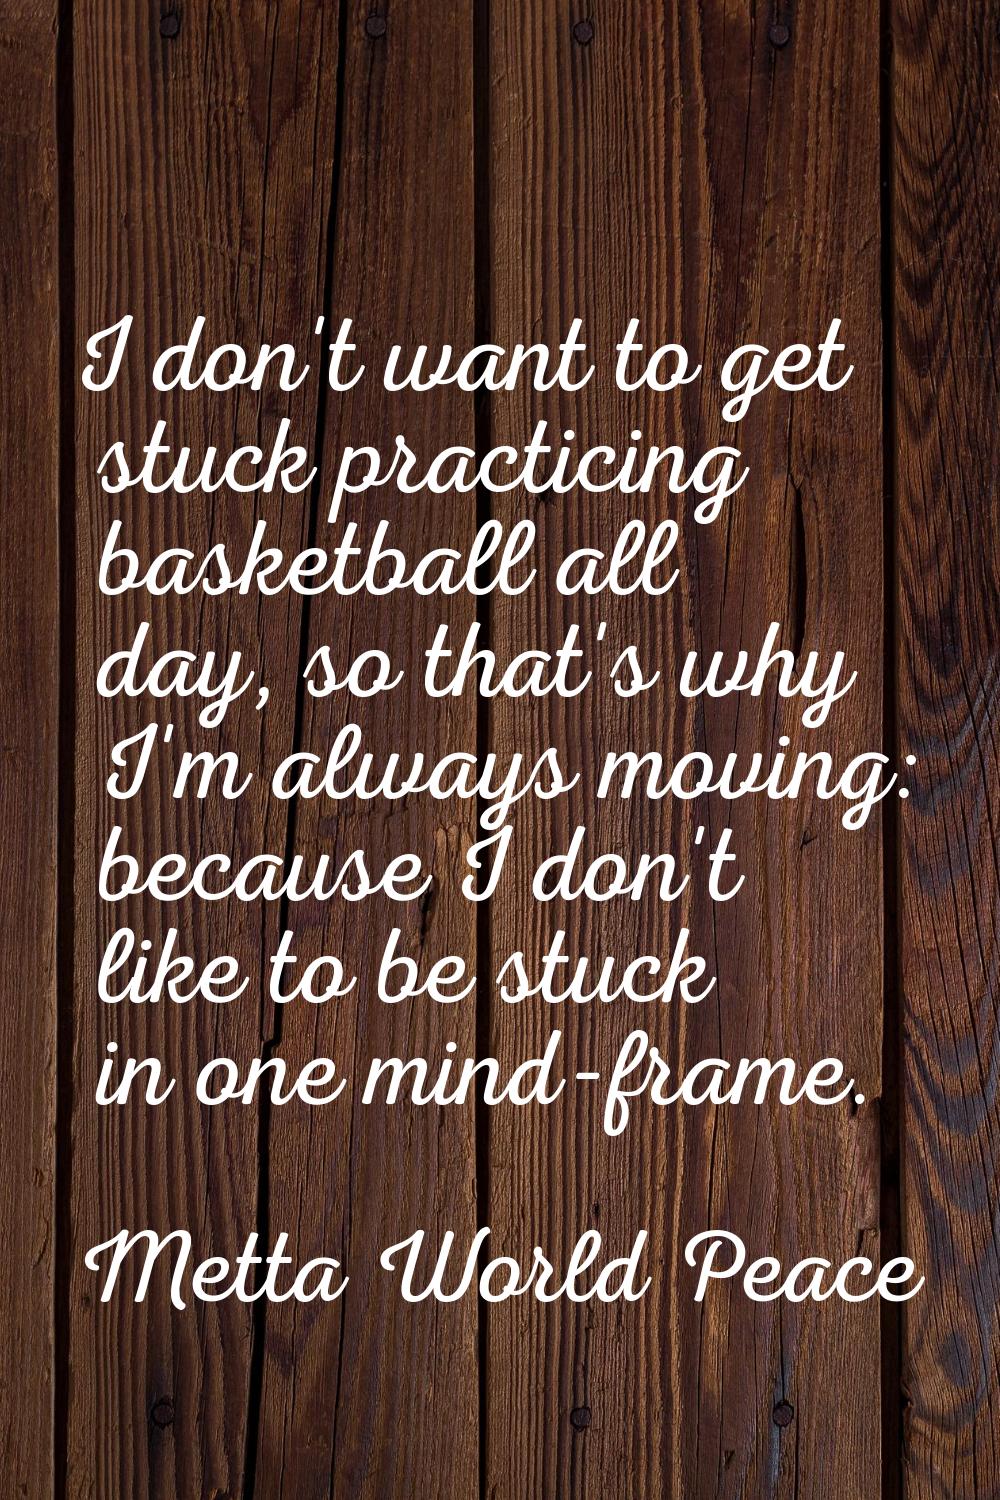 I don't want to get stuck practicing basketball all day, so that's why I'm always moving: because I